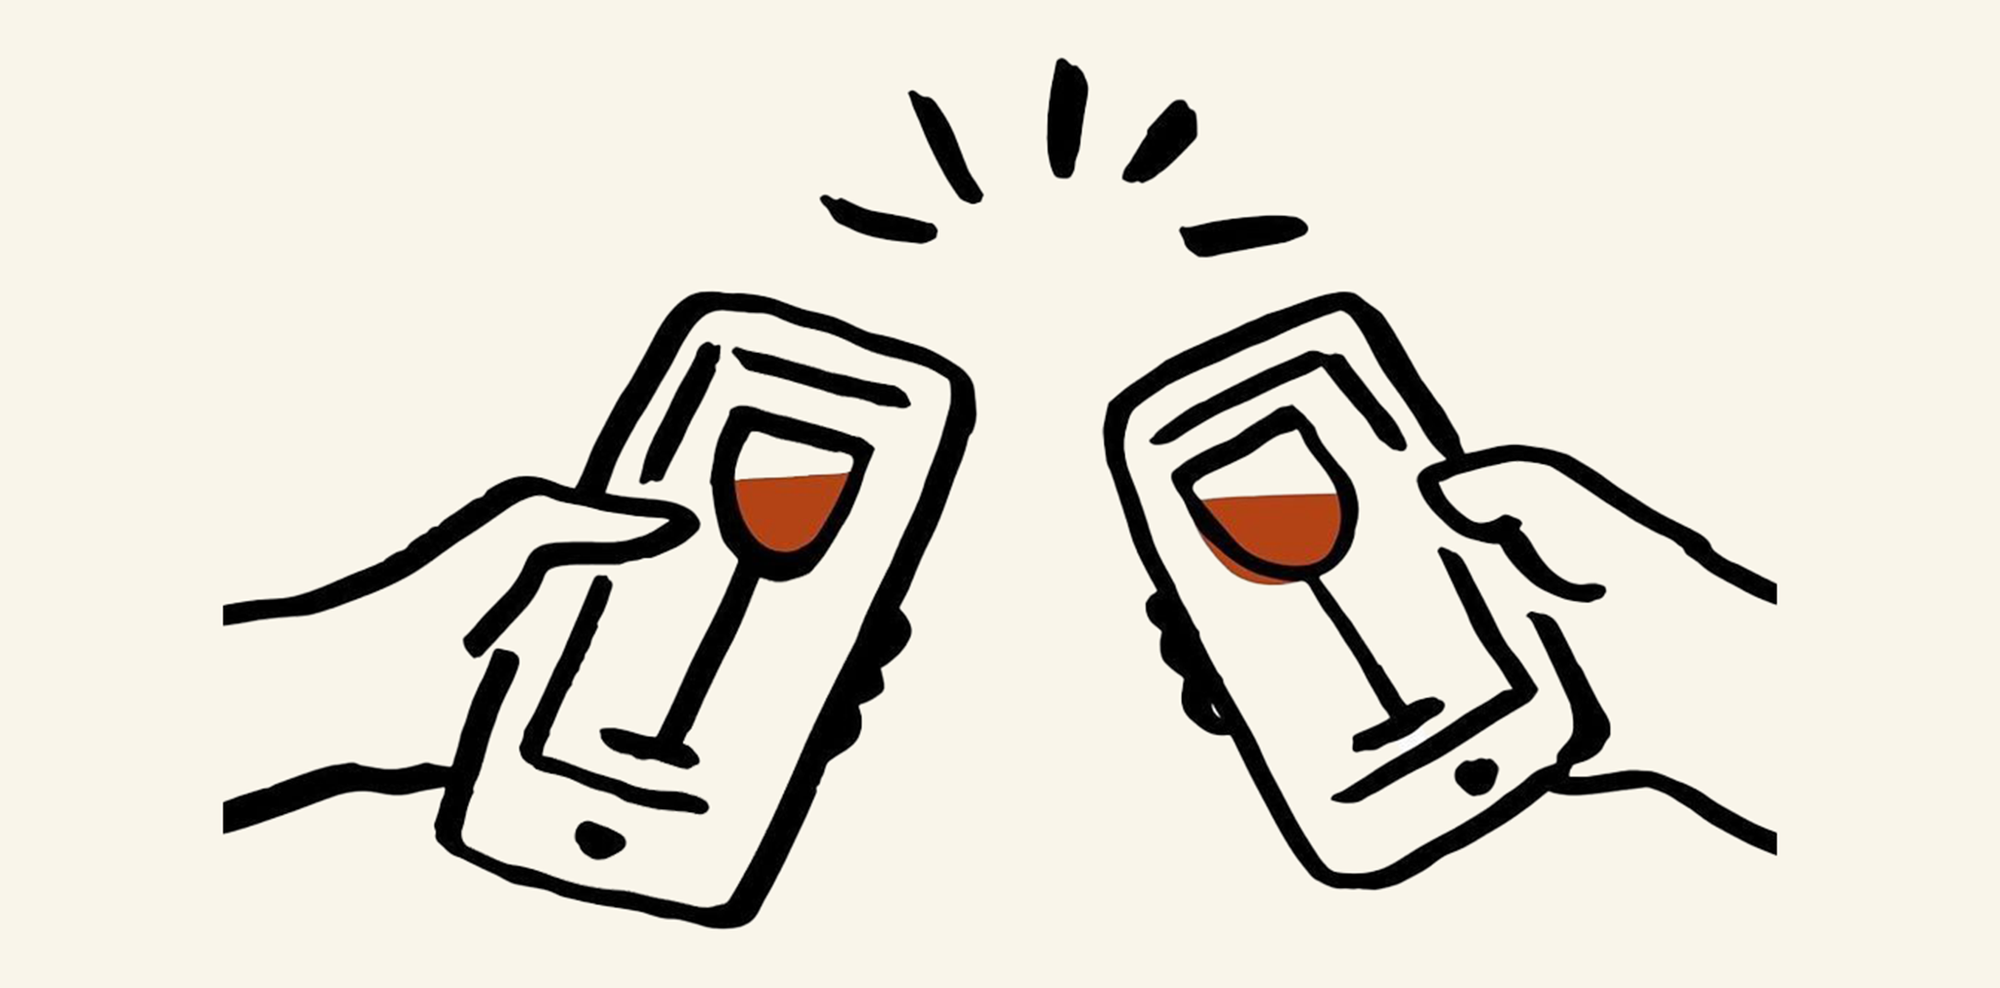 An illustration of two iPhones with wine glasses on the screen, clinking in "Cheers!"